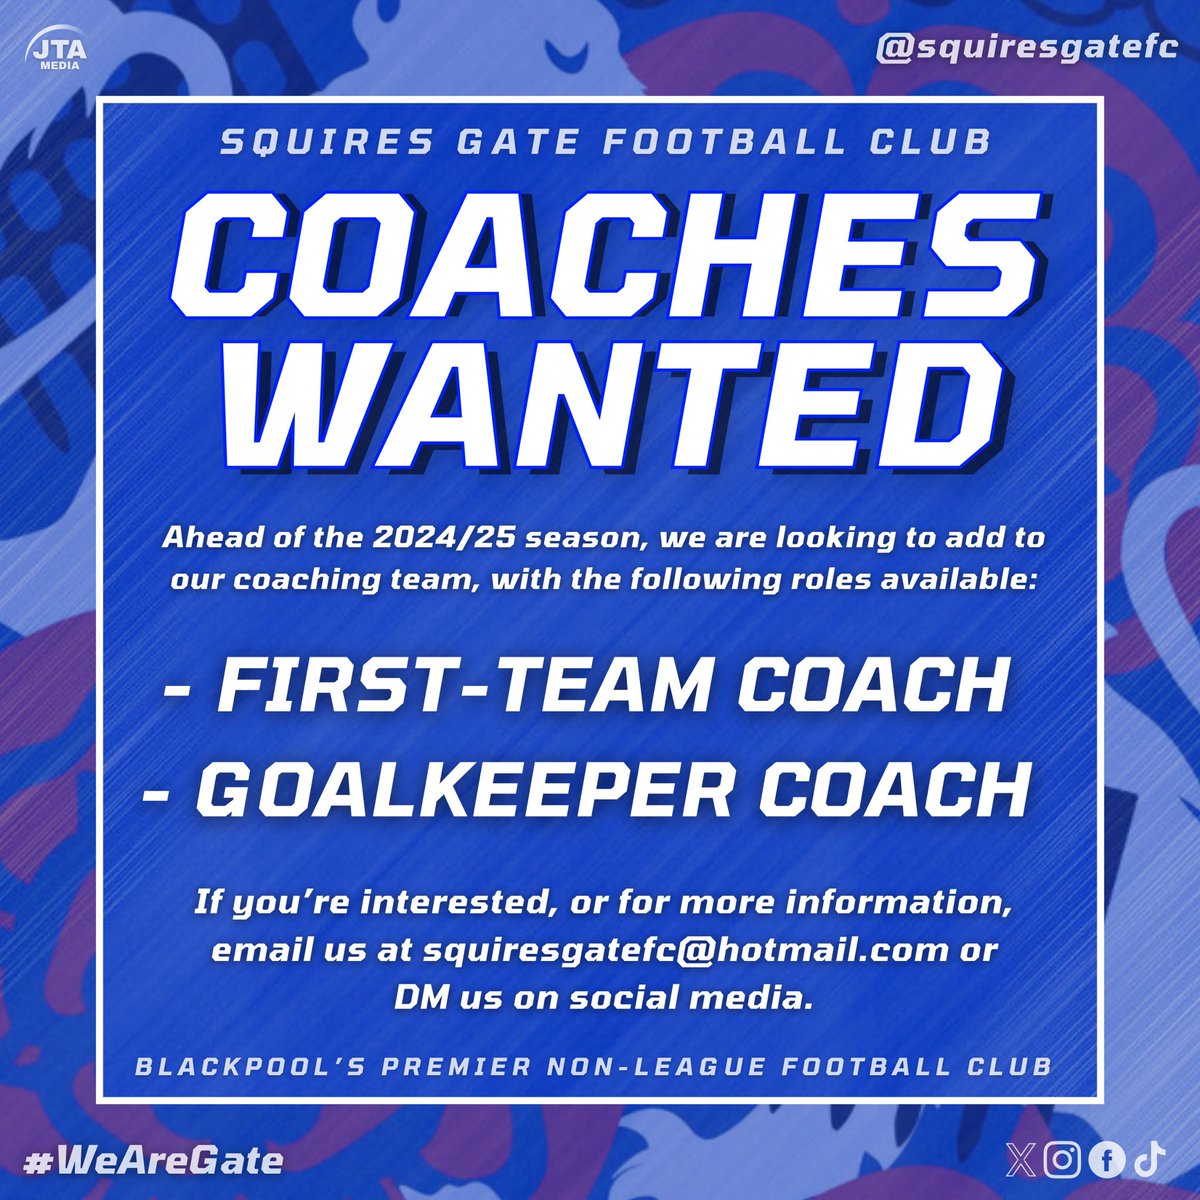 🚨 𝑪𝑶𝑨𝑪𝑯𝑬𝑺 𝑾𝑨𝑵𝑻𝑬𝑫

👔 We are looking to add a 𝗙𝗶𝗿𝘀𝘁-𝗧𝗲𝗮𝗺 𝗖𝗼𝗮𝗰𝗵 and a 𝗚𝗼𝗮𝗹𝗸𝗲𝗲𝗽𝗲𝗿 𝗖𝗼𝗮𝗰𝗵 to our coaching team. ⚽️🧤

📩 Email us at squiresgatefc@hotmail.com or send us a DM if you’re interested! 

🔷 #WeAreGate | @JTA__Media